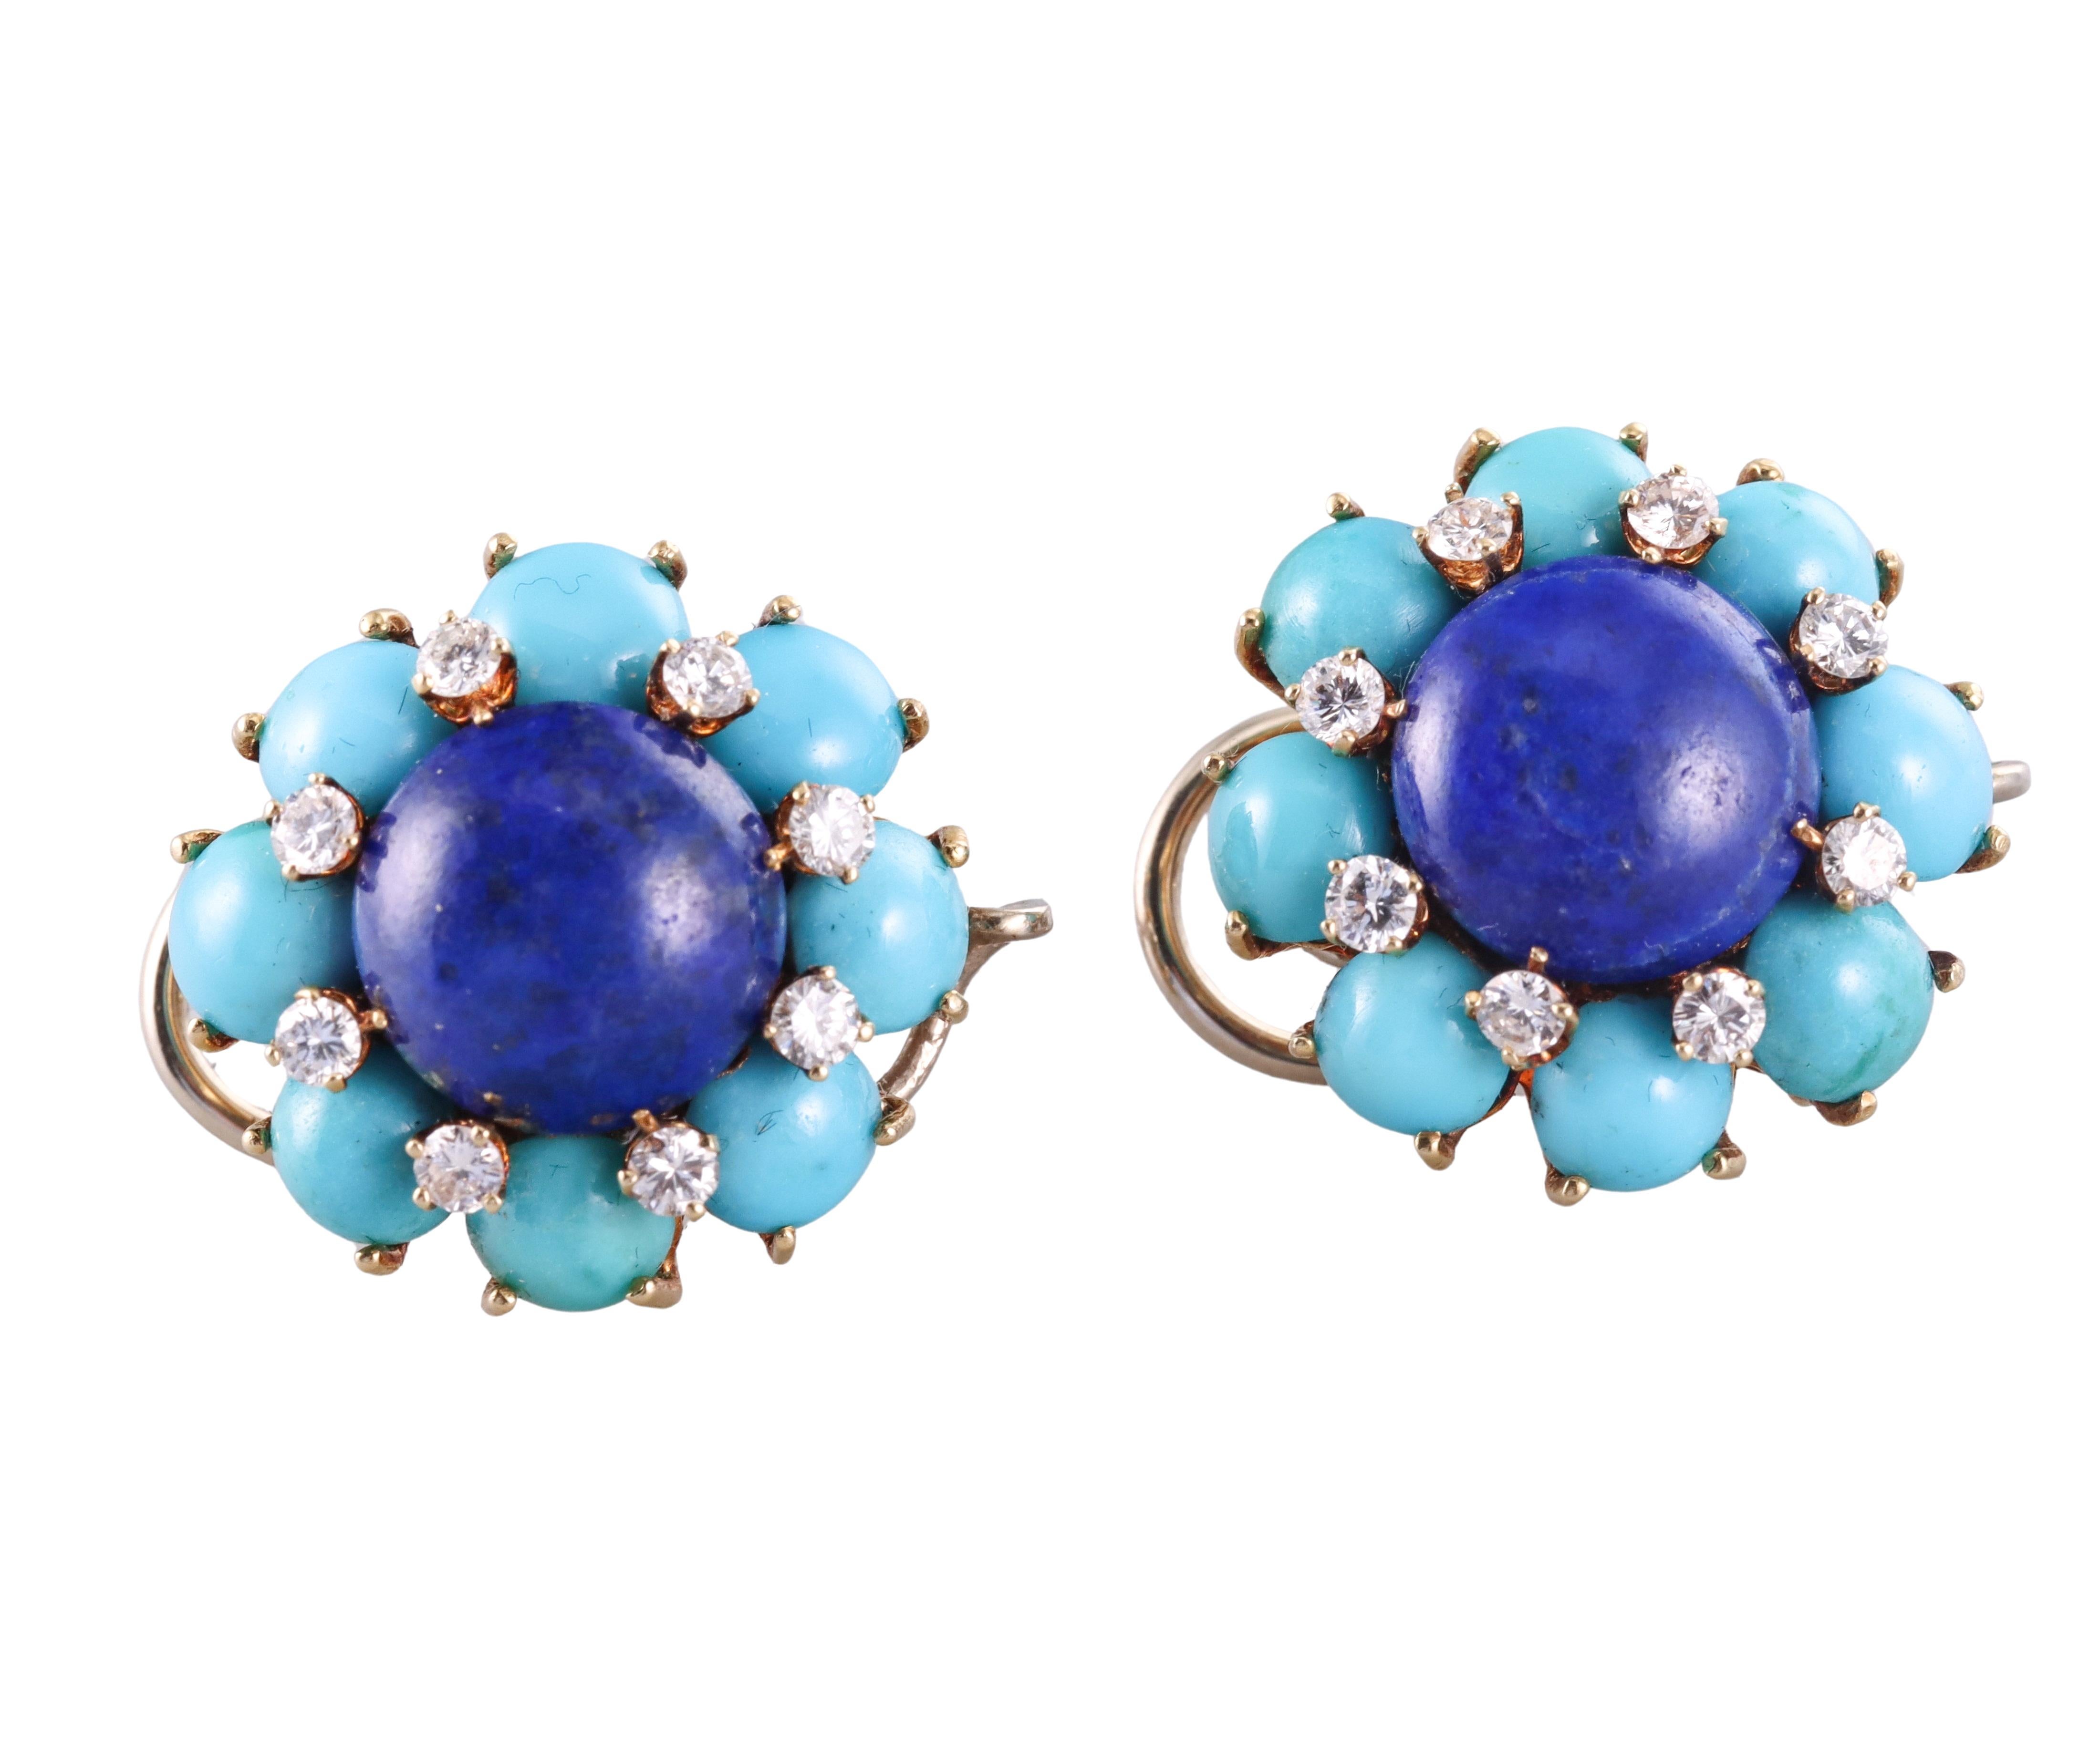 Pair of delicate vintage earrings by Cartier, set in 18k gold, featuring lapis lazuli in the center, surrounded with turquoise and a total of approximately 0.70ctw G/VS diamonds. Earrings measure 0.75